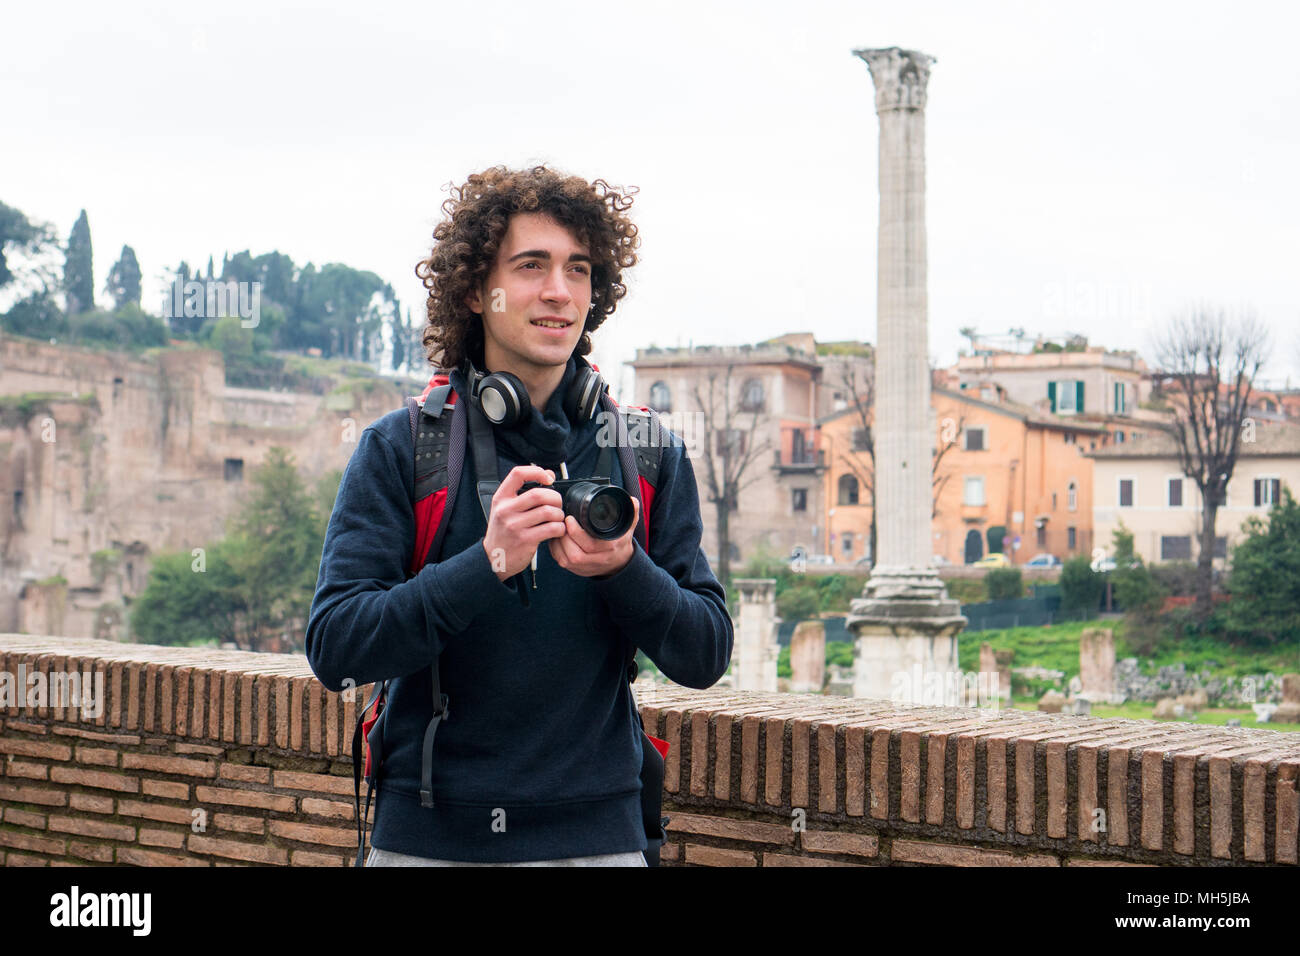 Handsome young tourist with curly hair taking photos of Roman forum in Rome, Italy. Young man travel with his camera Stock Photo